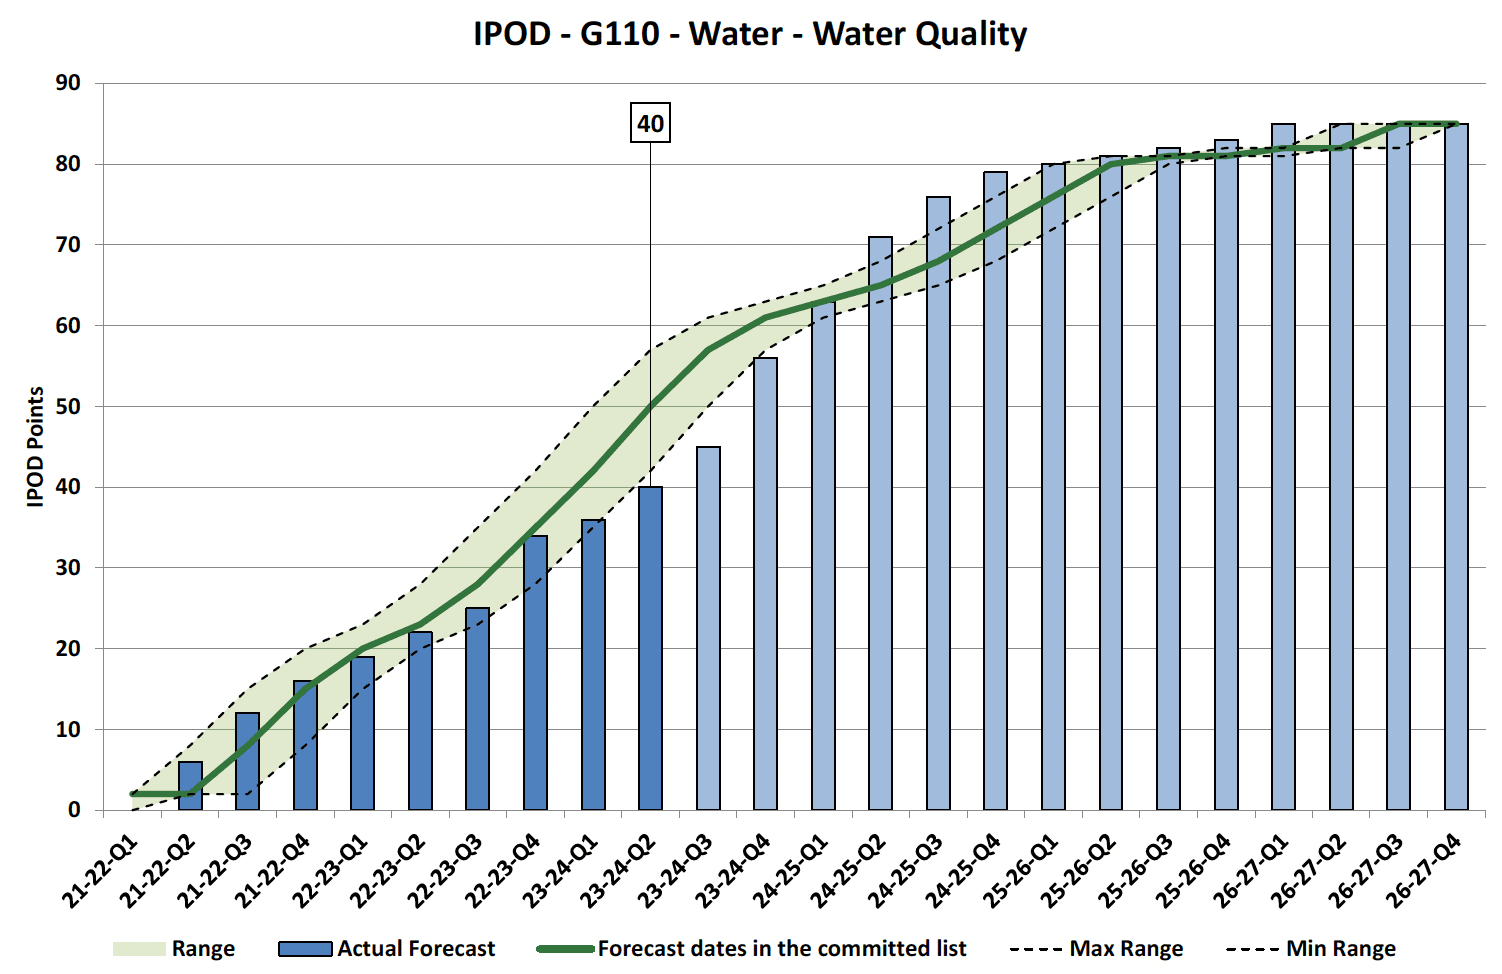 Chart showing IPOD points achieved or forecast for Financial Completion milestone against target range for Water Quality Projects in Water Portfolio